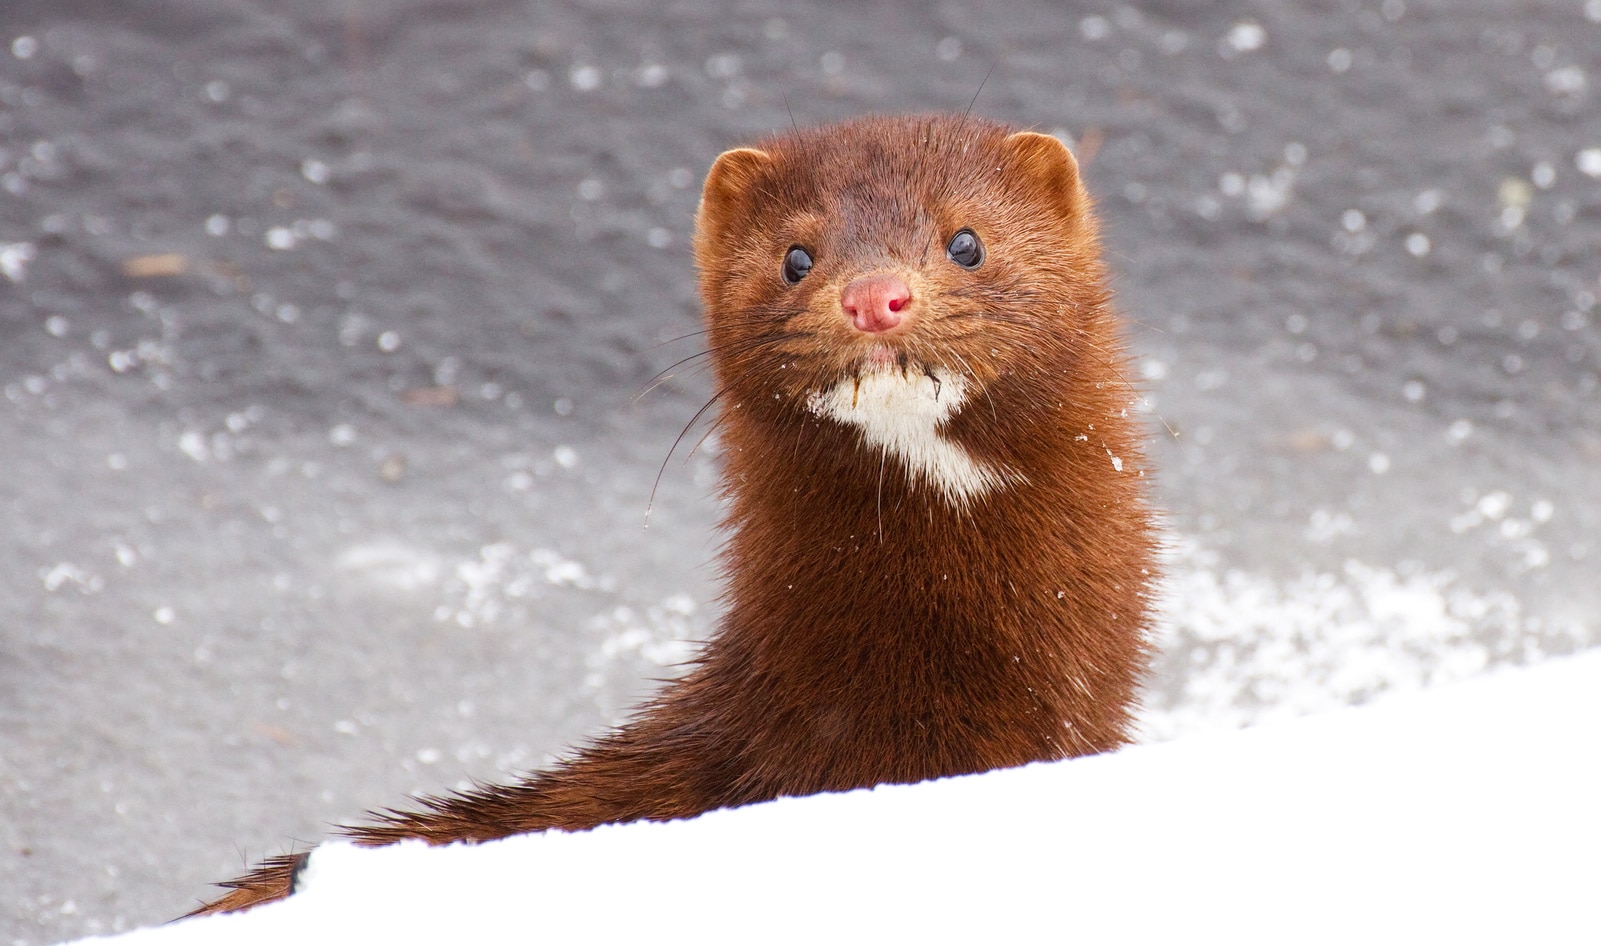 Dutch Government Is Now Killing Thousands of Minks to Stop Spread of COVID-19 to Humans